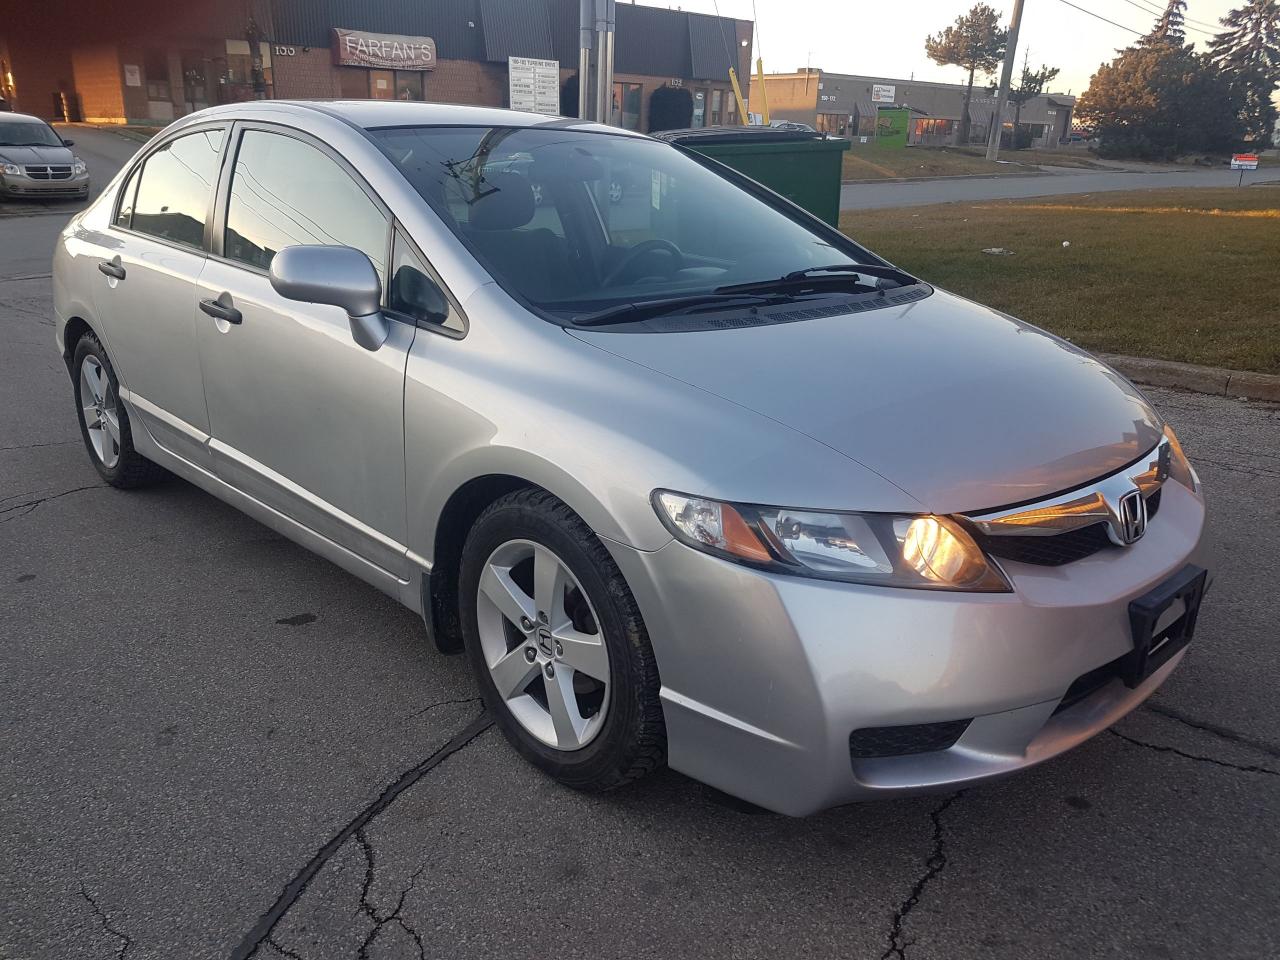 Used 2008 Honda Civic DX-G for Sale in North York, Ontario | Carpages.ca